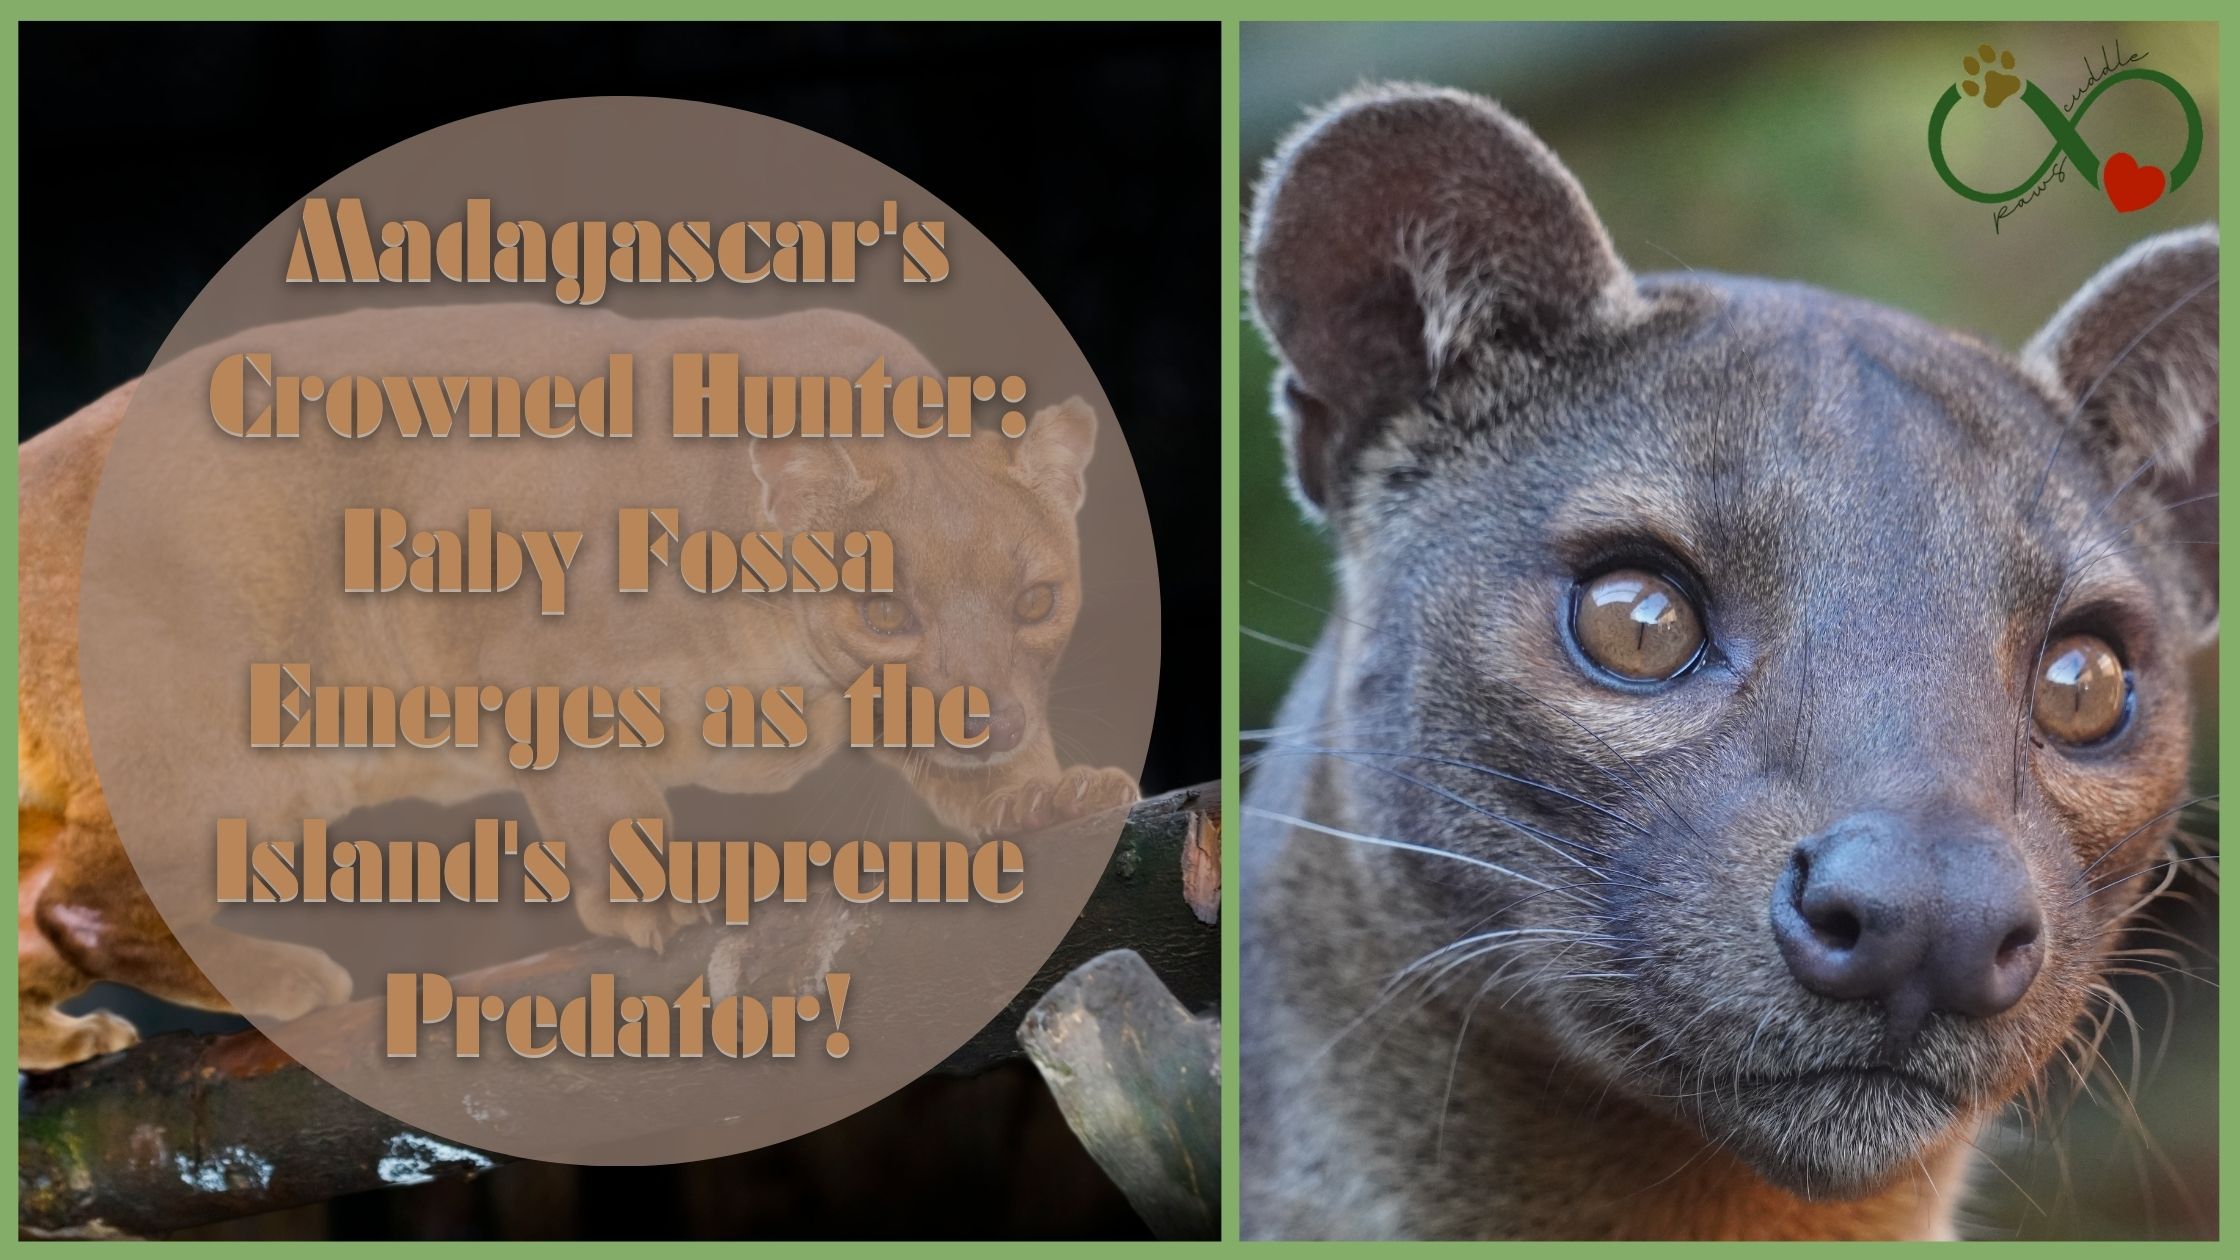 Madagascar's Crowned Hunter: Baby Fossa Emerges as the Island's Supreme Predator!